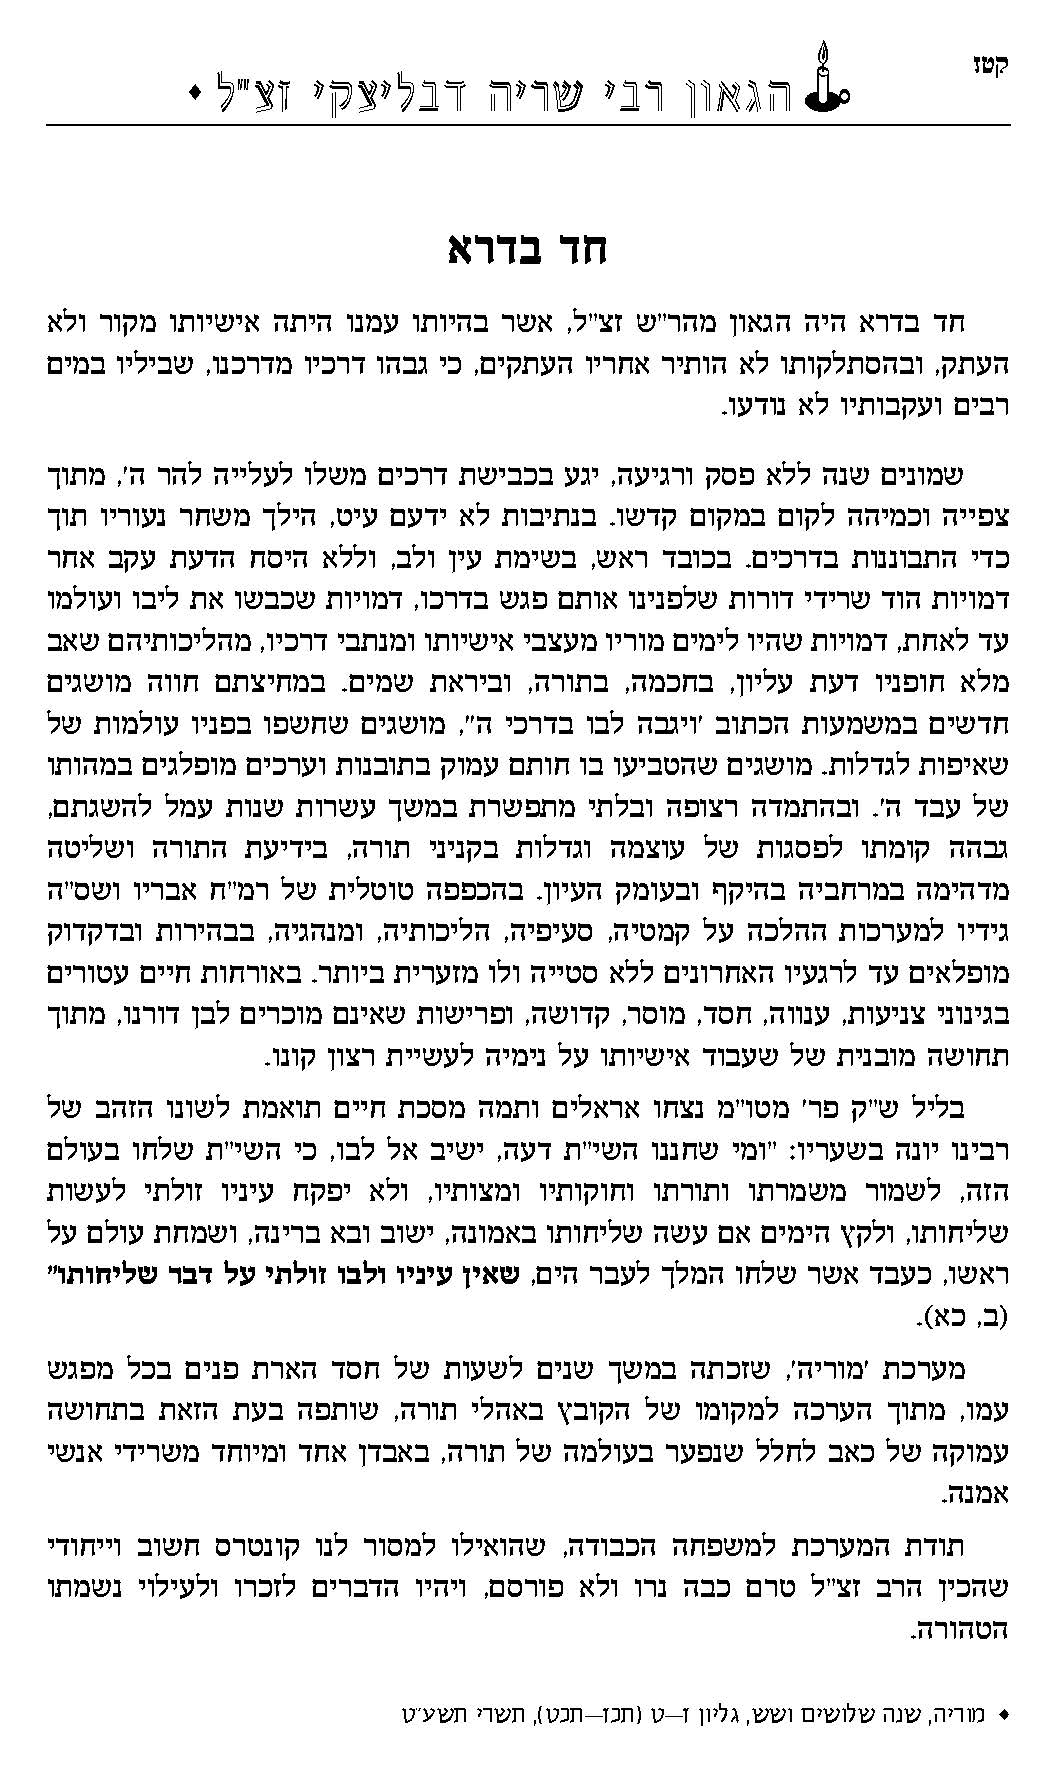 Untitled Extract Pages_עמוד_1.jpg